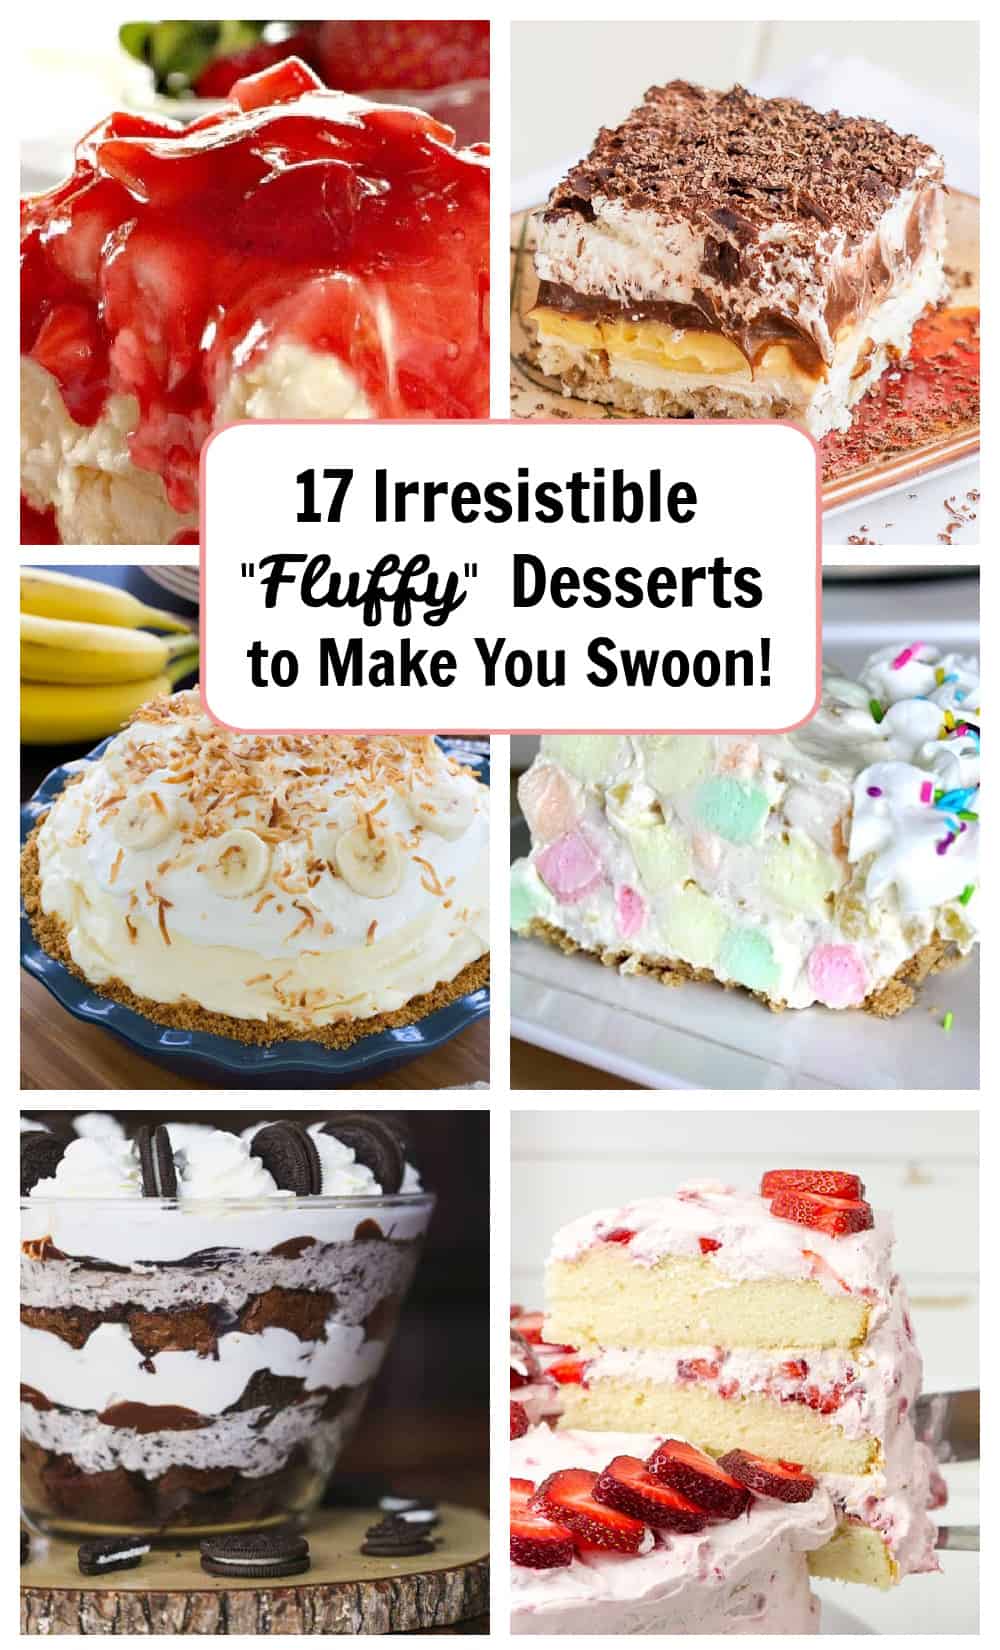 17 Irresistible "Fluffy" Dessert Recipes to Make You Swoon!